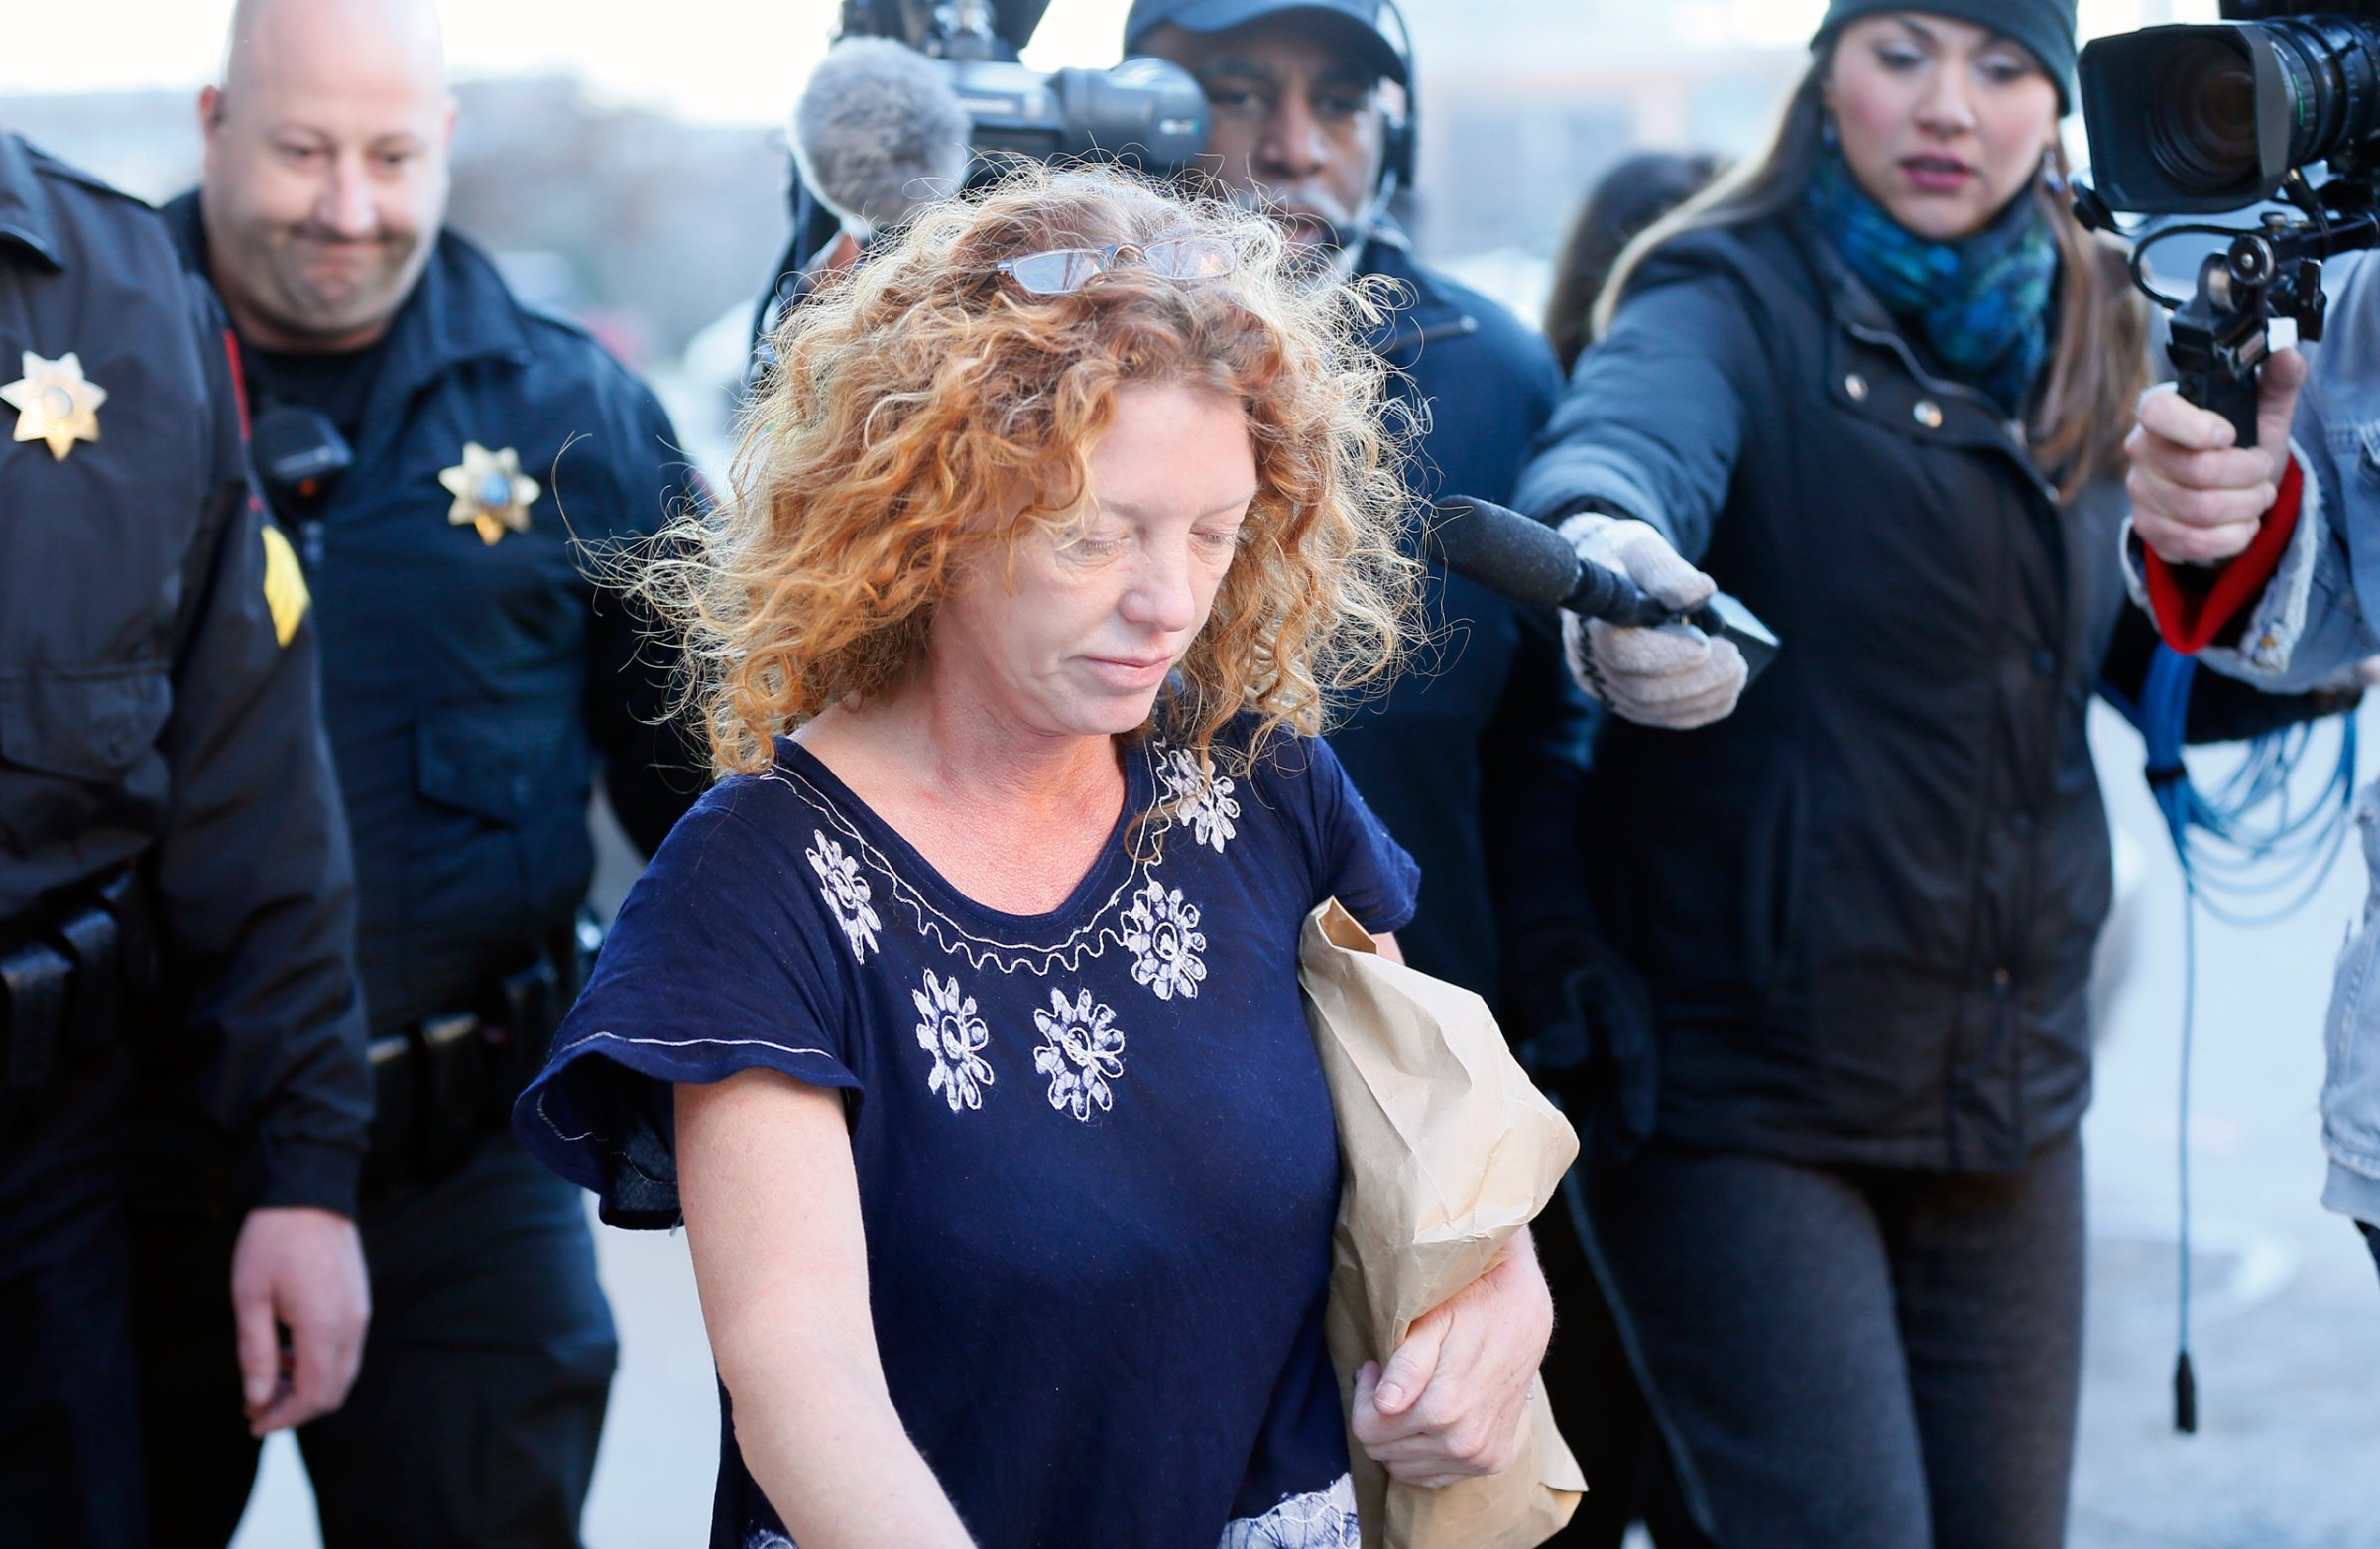 Tonya Couch, center, the mother of a Texas teen who used an "affluenza" defense in a drunken wreck, leaves Tarrant County Jail, Tuesday, Jan. 12, 2016, in Fort Worth, Texas. She is to be fitted with a GPS monitor before release. A judge decreased Couch's bond Monday from $1 million to $75,000. Couch is charged with hindering the apprehension of a felon after she and her son, Ethan Couch, were caught in a Mexican resort city. (AP Photo/Brandon Wade)